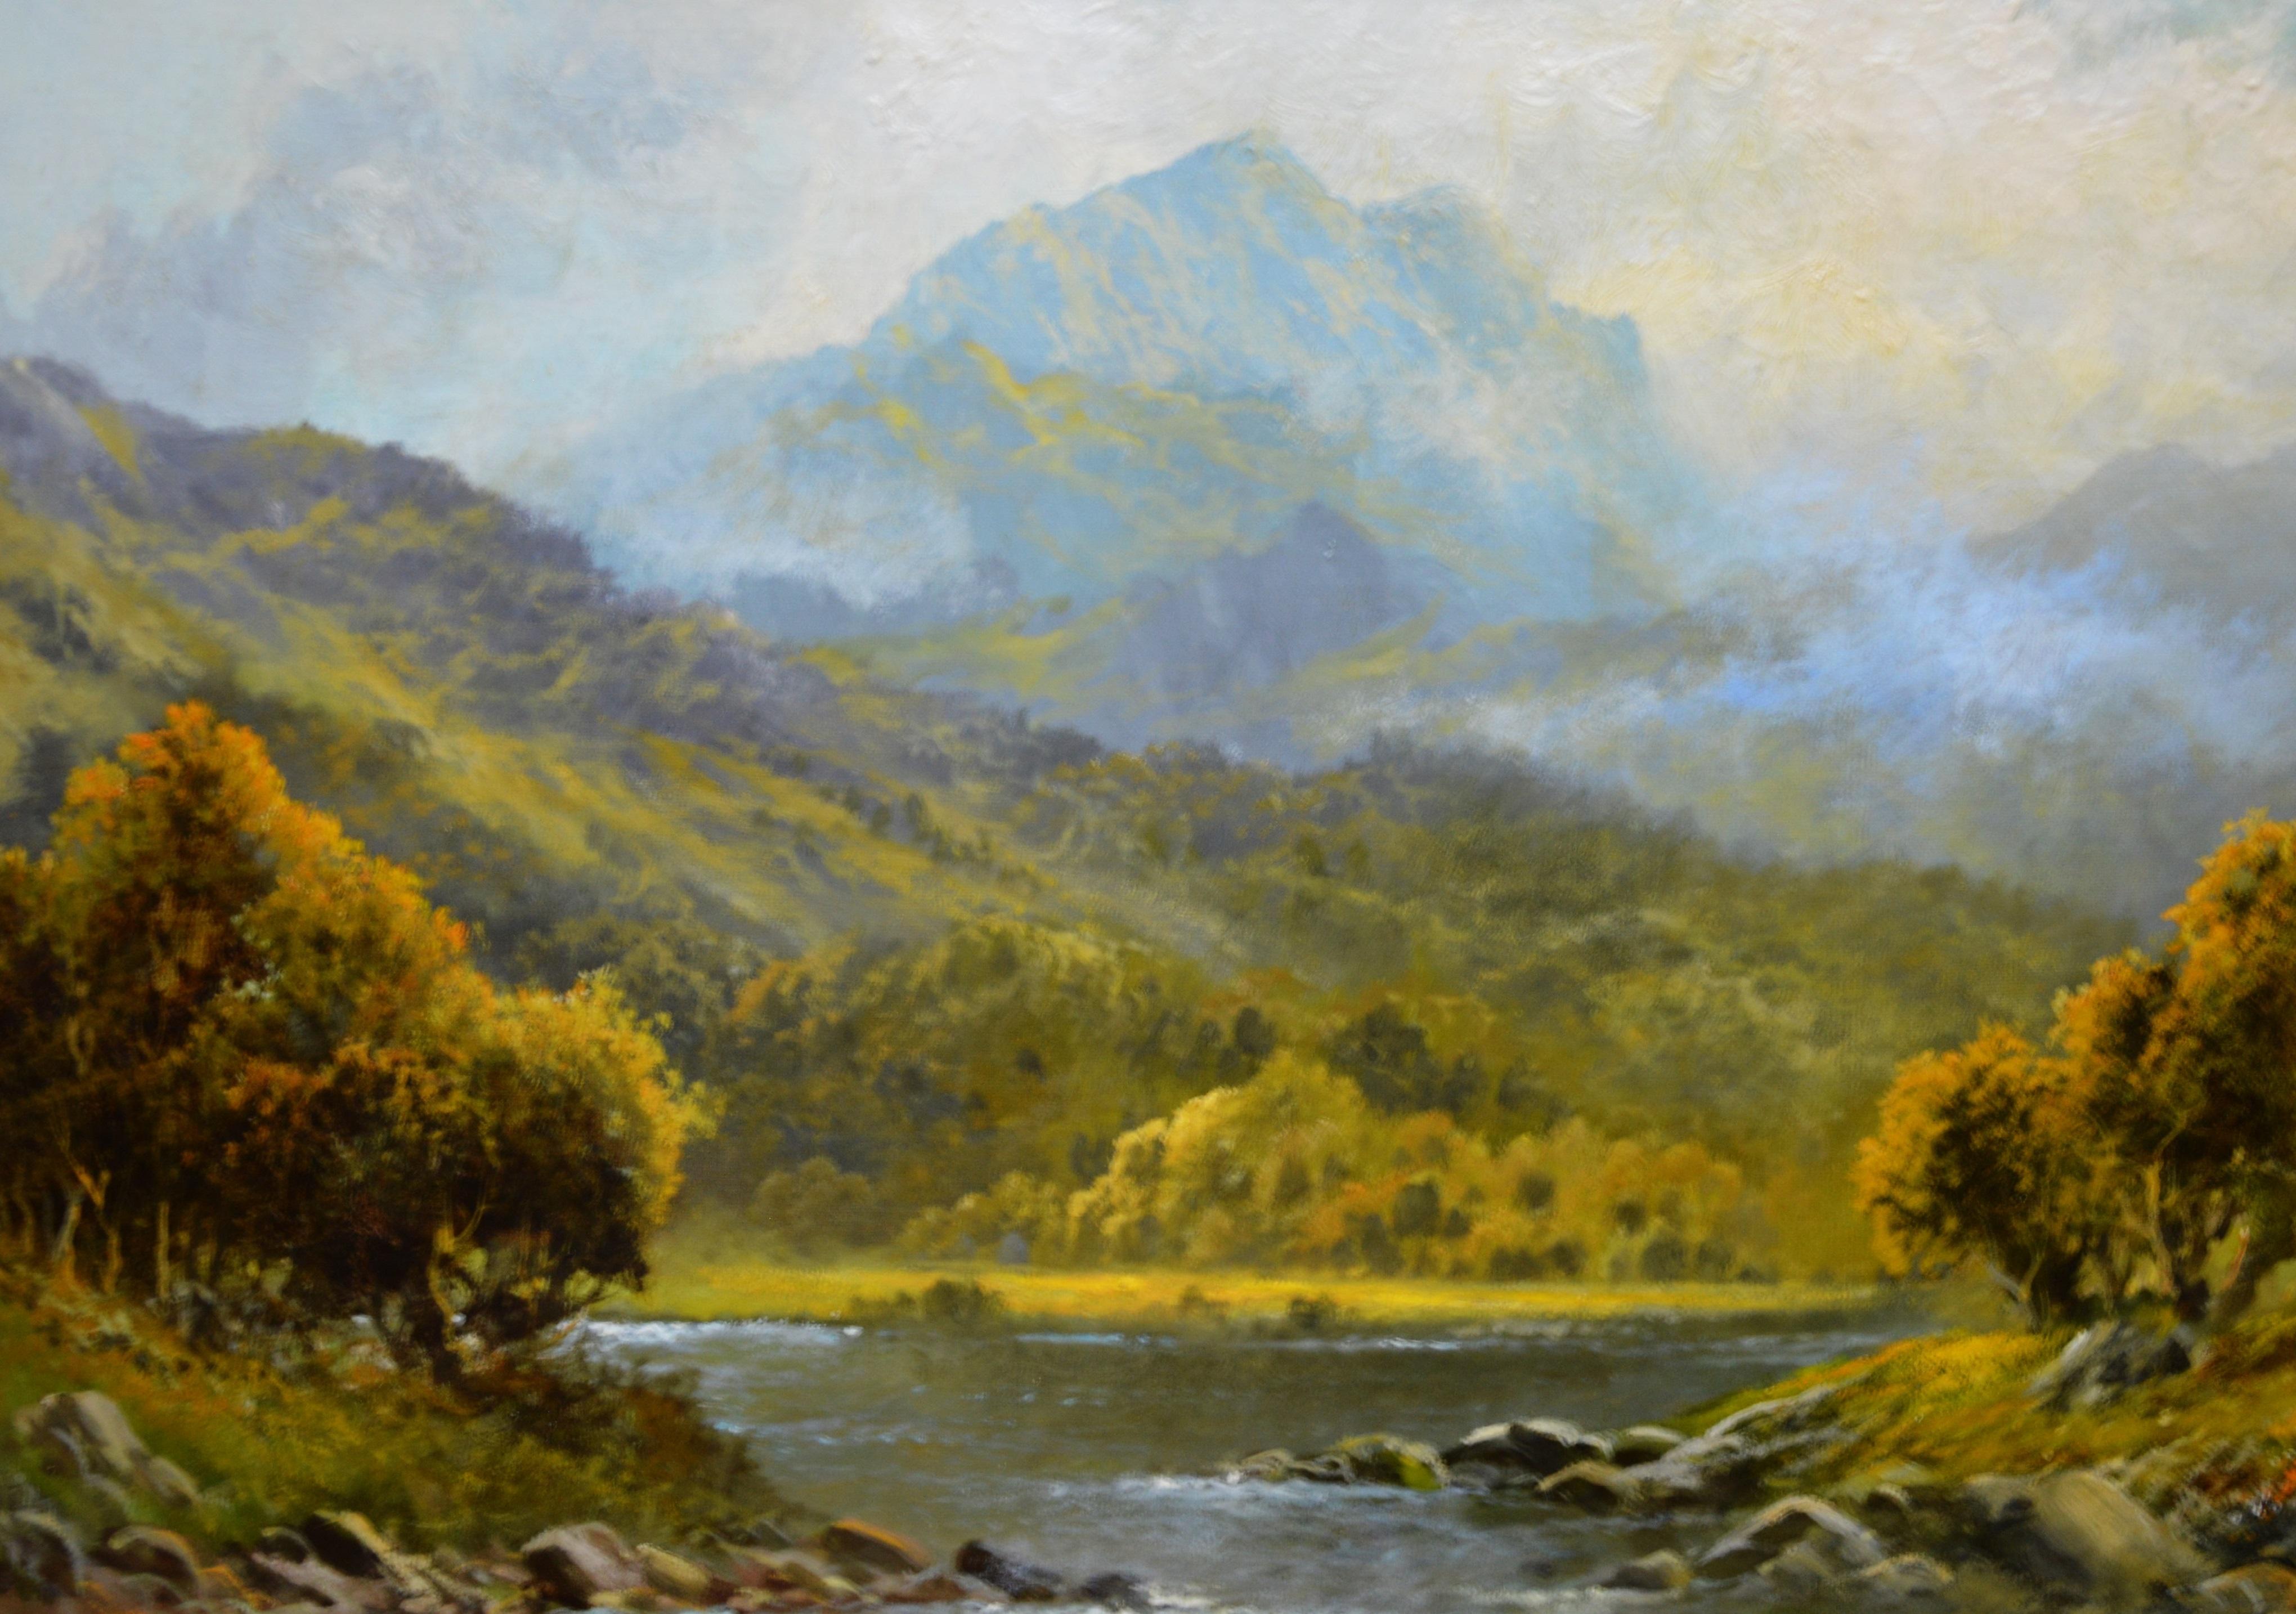 This is a large fine original 19th century Scottish landscape oil on canvas depicting the banks of ‘Loch Katrine’ in the Highlands of Scotland by the listed Victorian landscape artist William Langley (1868-1940). This antique oil painting is signed